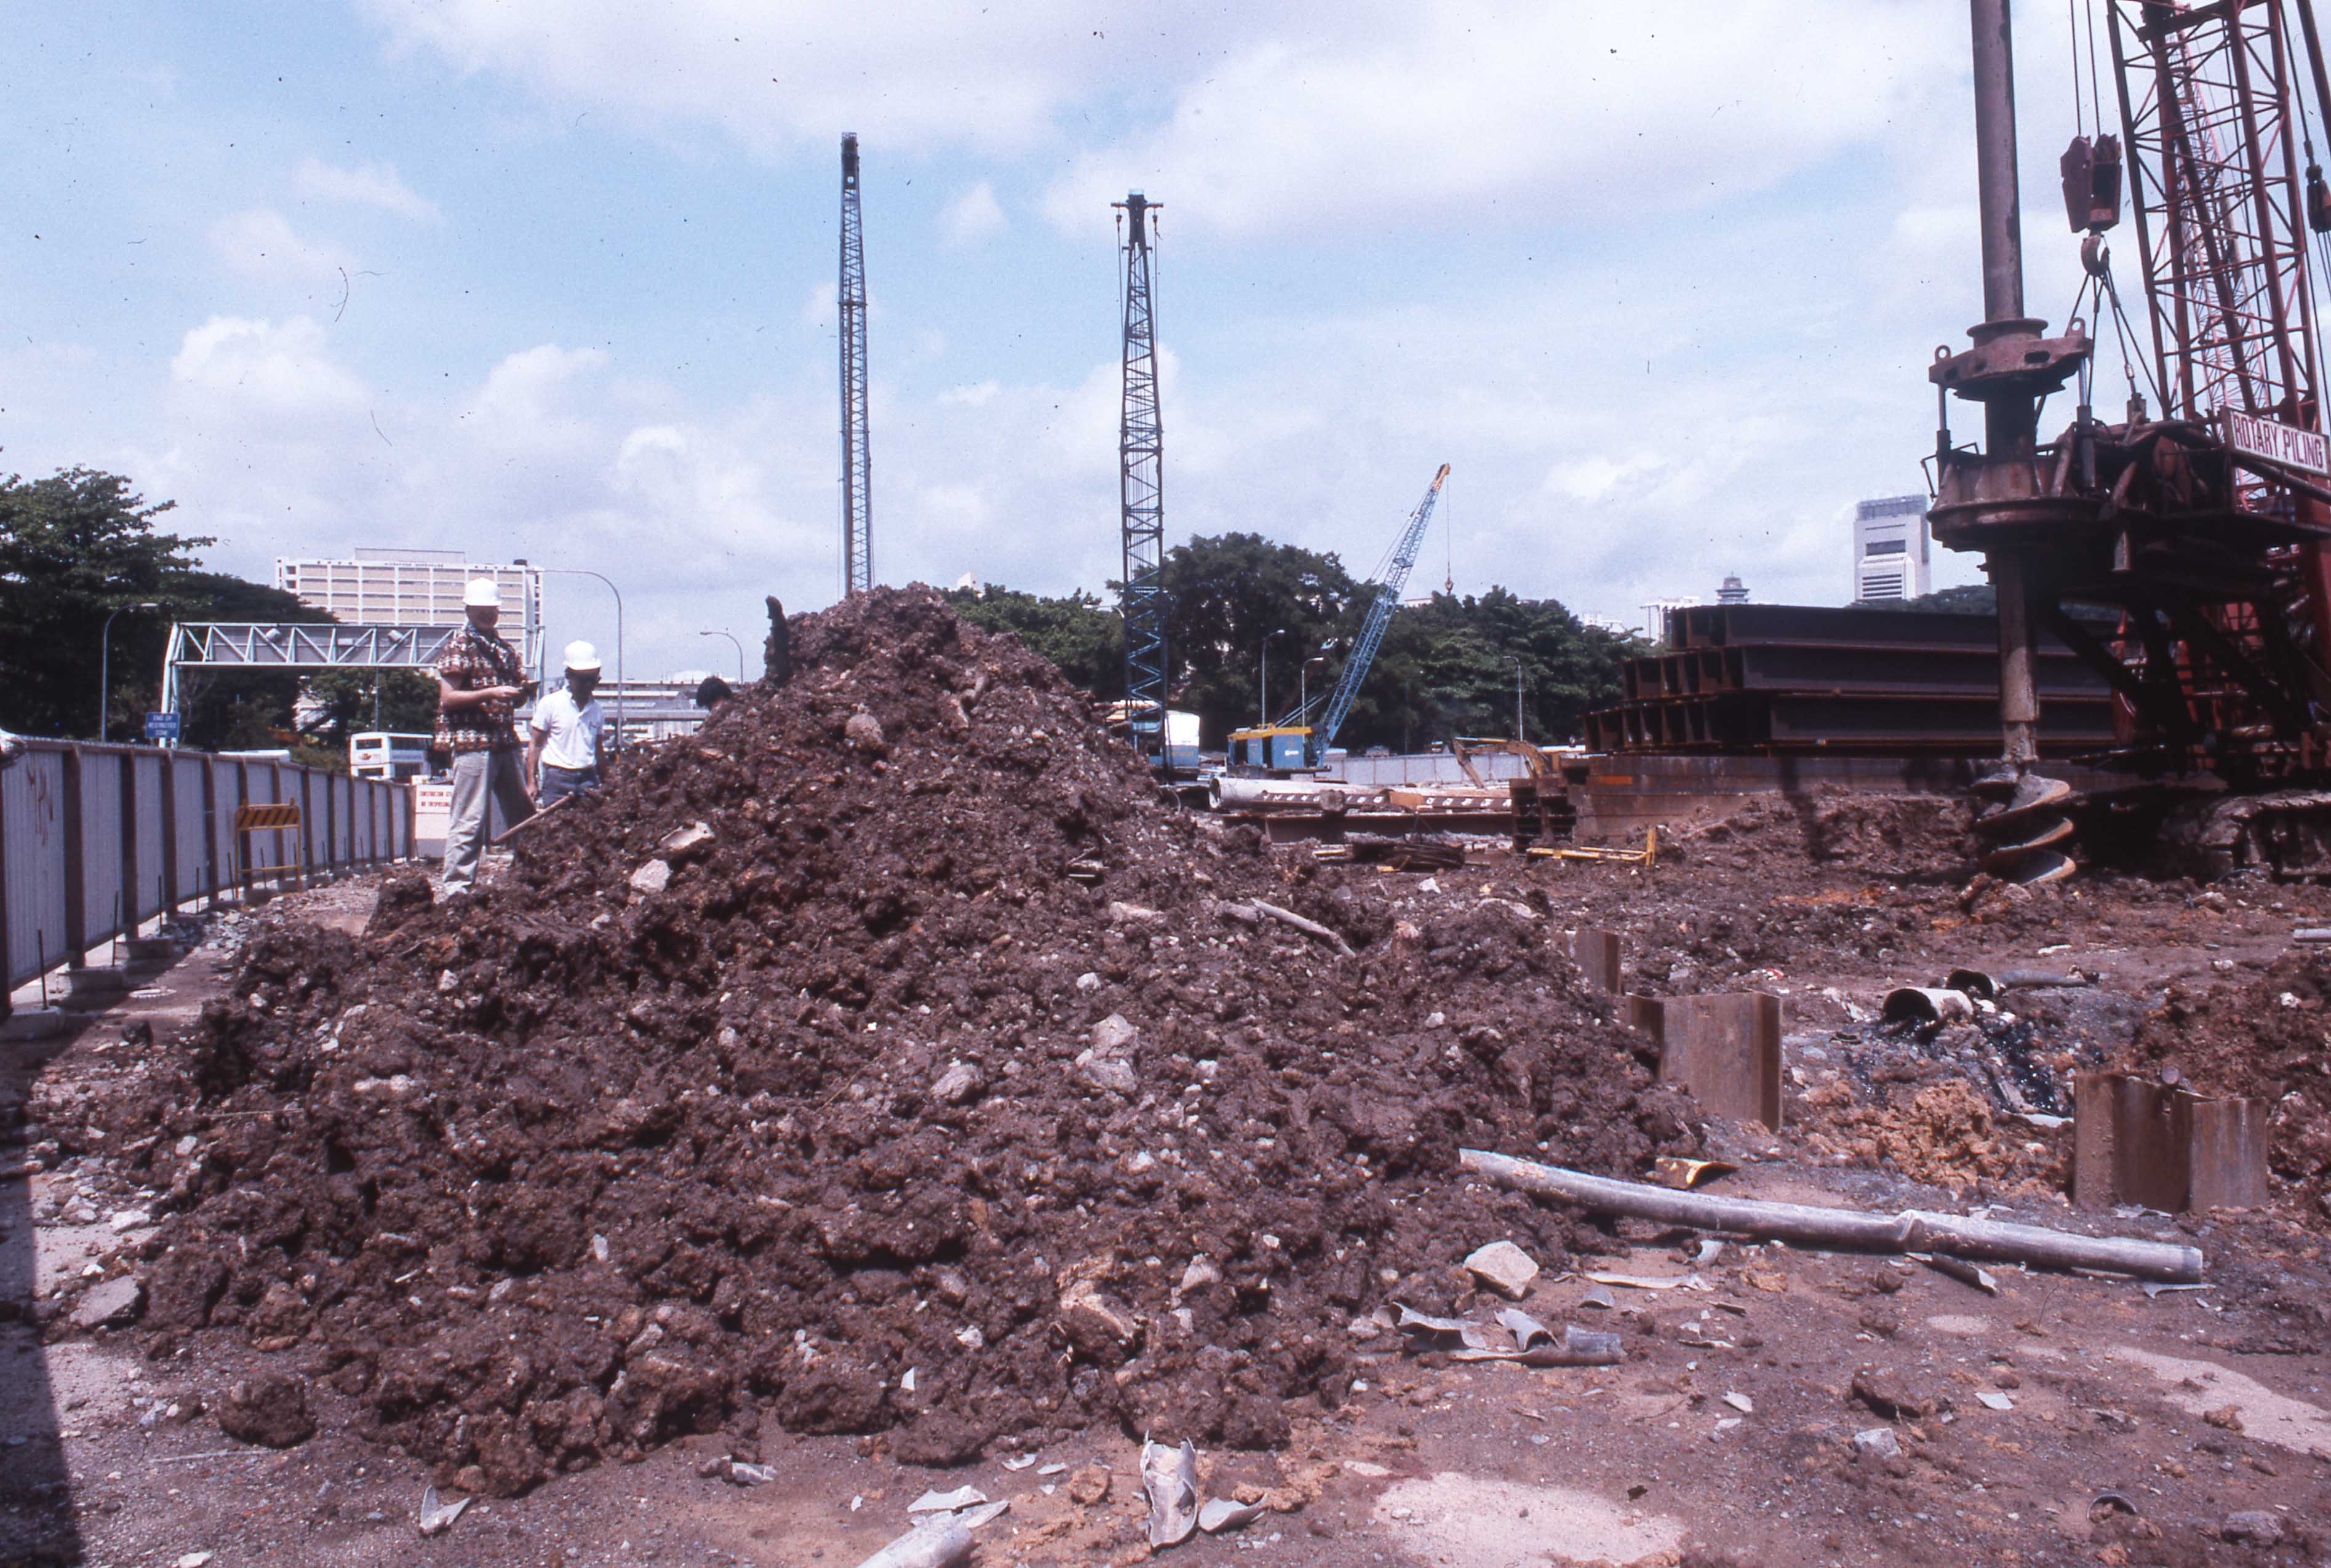 Fig. 3 Salvage during construction project